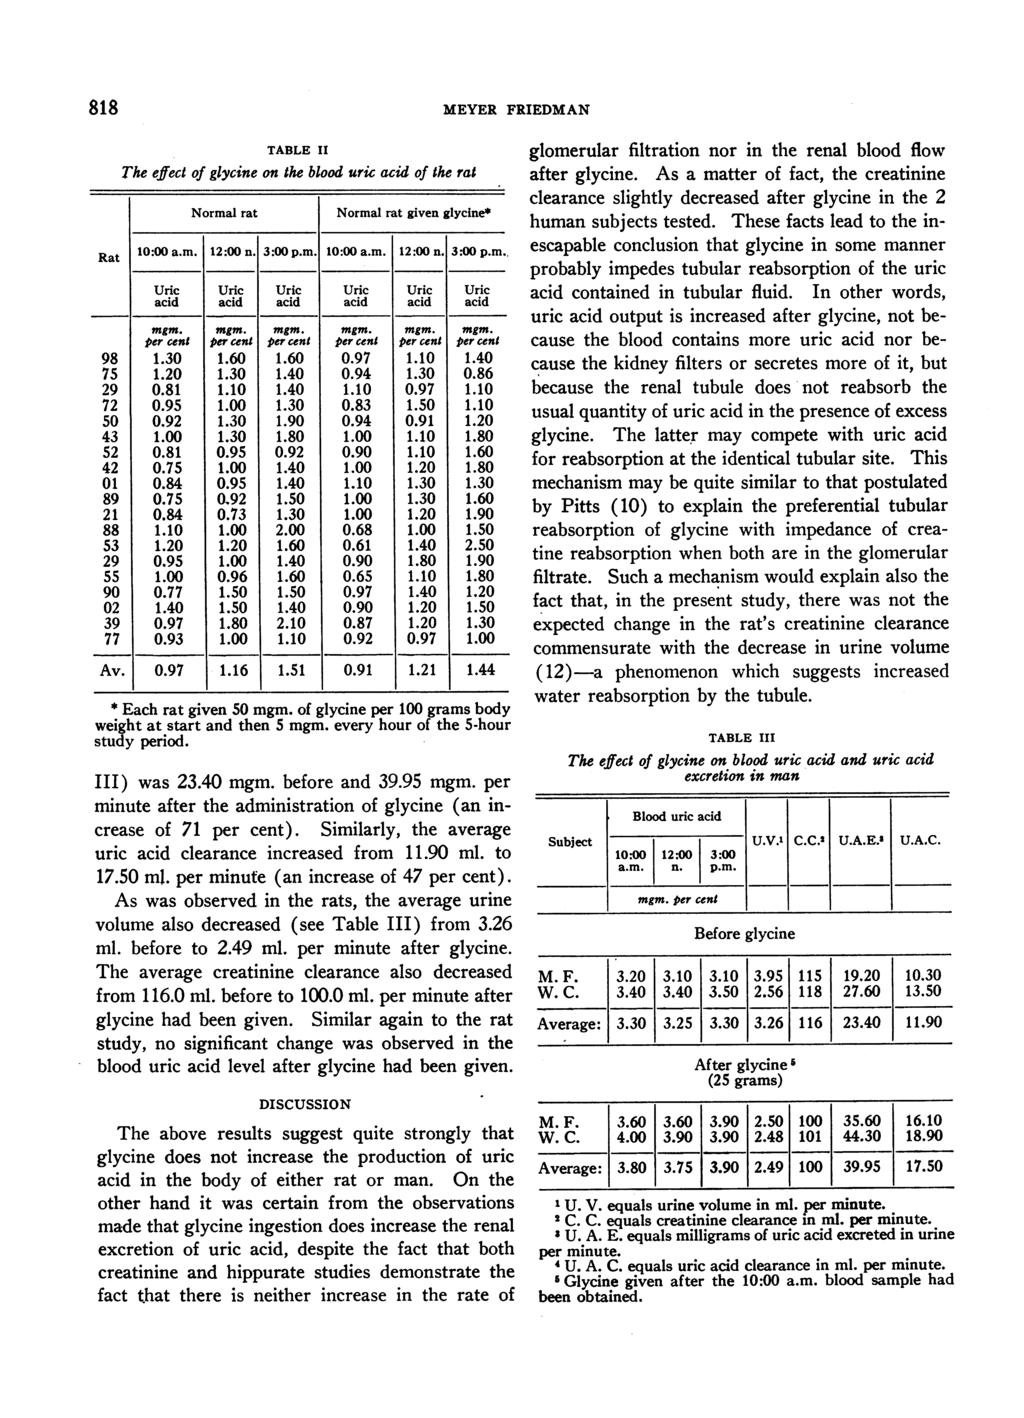 8^18 TABLE II The effect of glycine on the blood uric acid of the rat Normal rat Normal rat given glycine* Rat 10:00 a.m. 12:00 n. 3:00 p.m. 10:00 a.m. 12:00 n. 3:00 p.m., Uric Uric Uric Uric Uric Uric acid acid acid acid acid acid mgm.